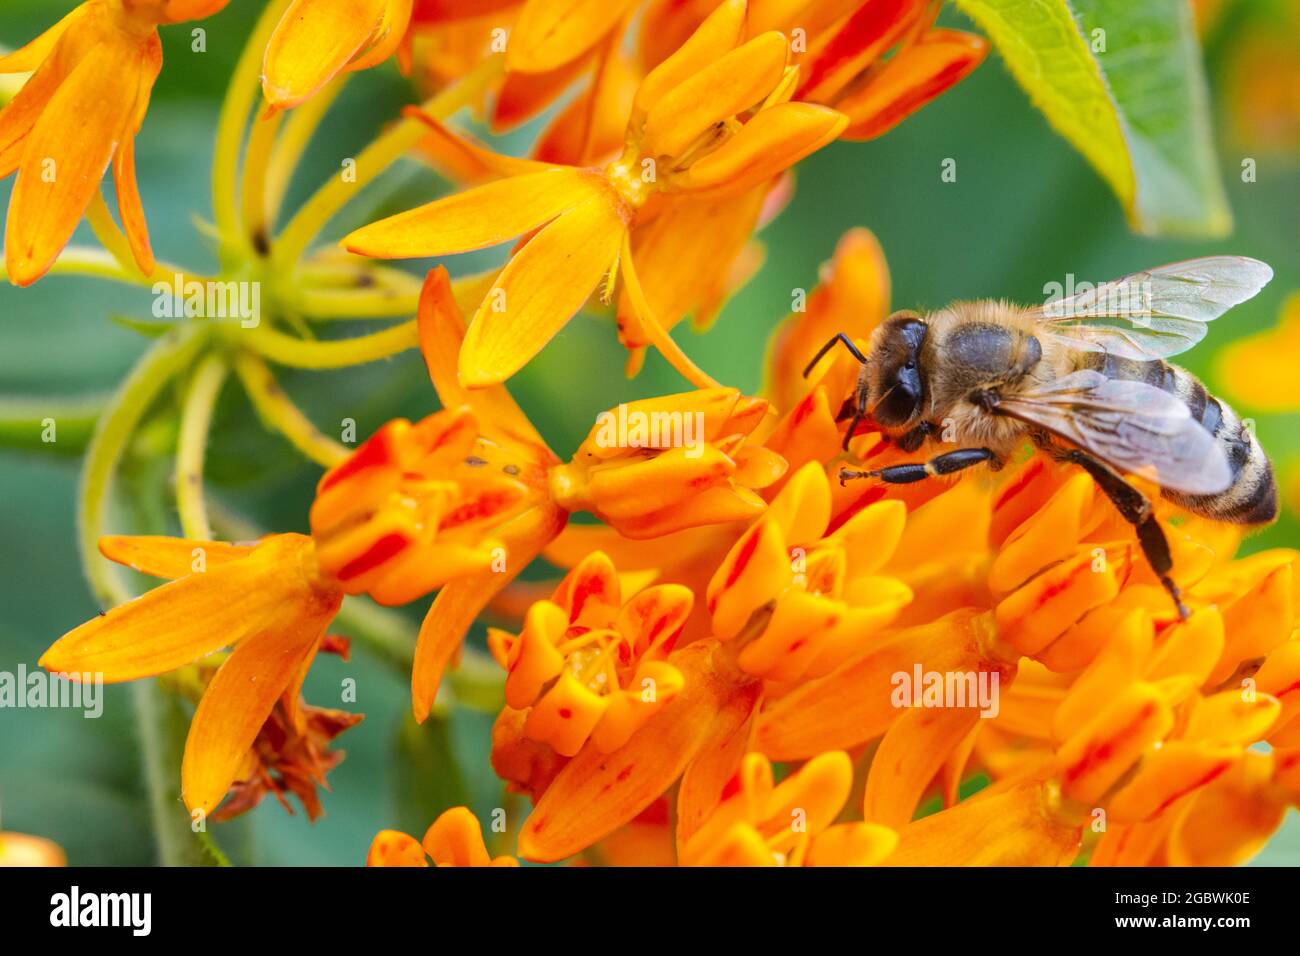 Honey bee (Apis mellifera) gathering nectar and pollen from a Butterfly-weed flower (Asclepias tuberosa.) Closeup. Stock Photo